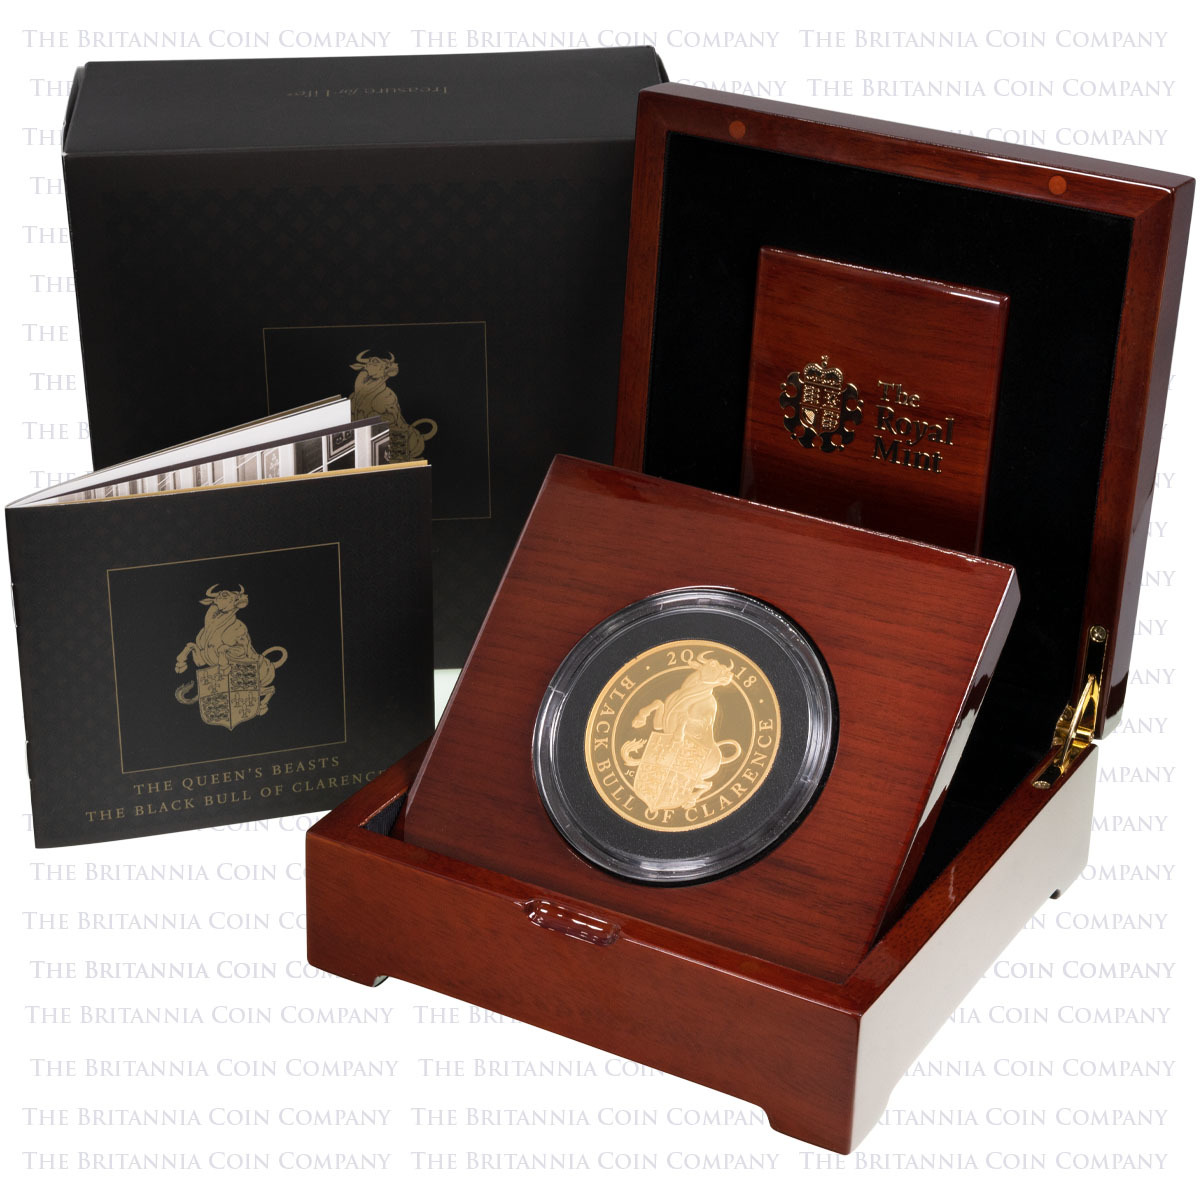 UK18QBG5 2018 Queen's Beasts Black Bull Of Clarence Five Ounce Gold Proof Coin Boxed